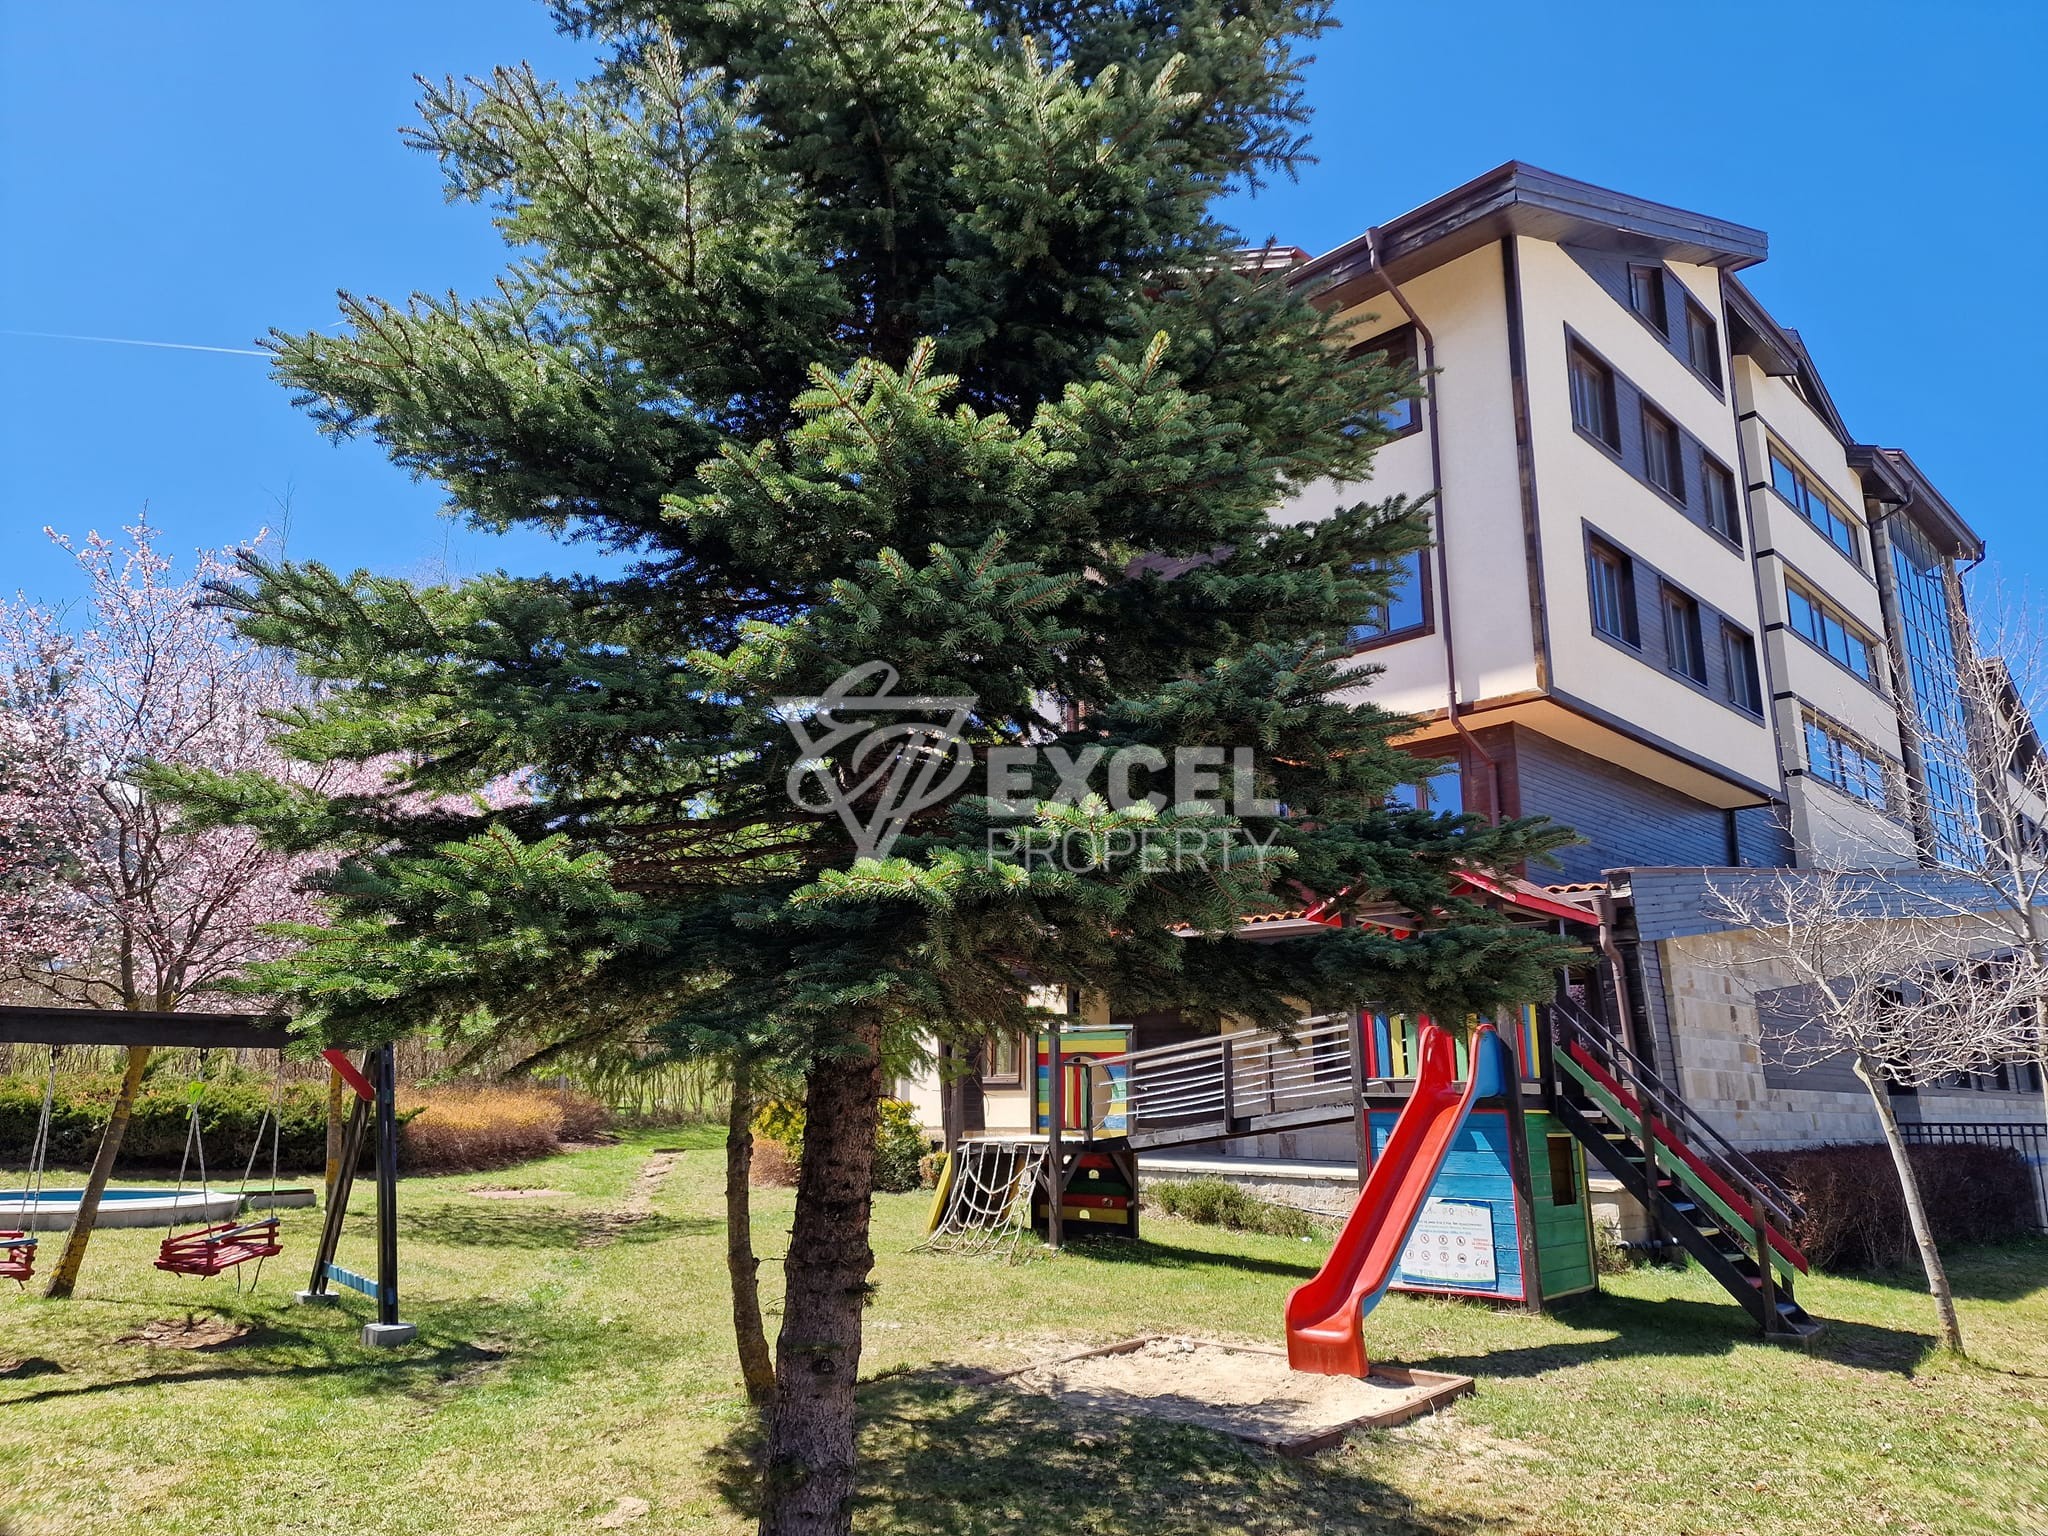 Two-bedroom apartment for sale in the Terra**** complex, next to Pirin Golf